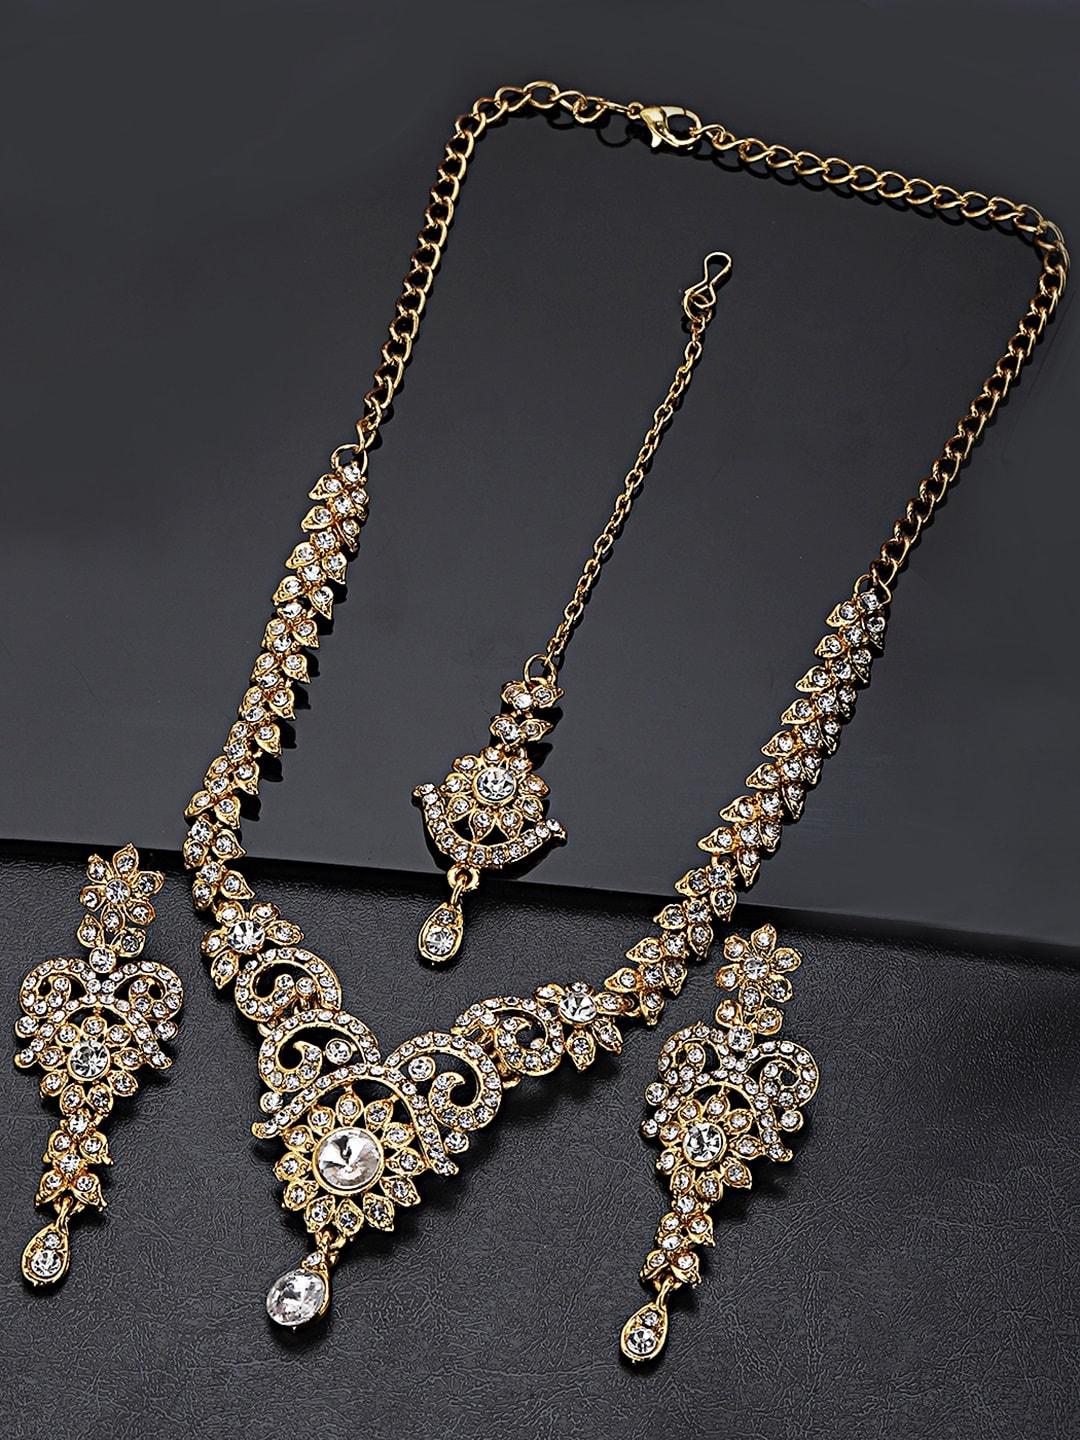 Carlton London Gold-Plated CZ Studded Handcrafted Jewellery Set